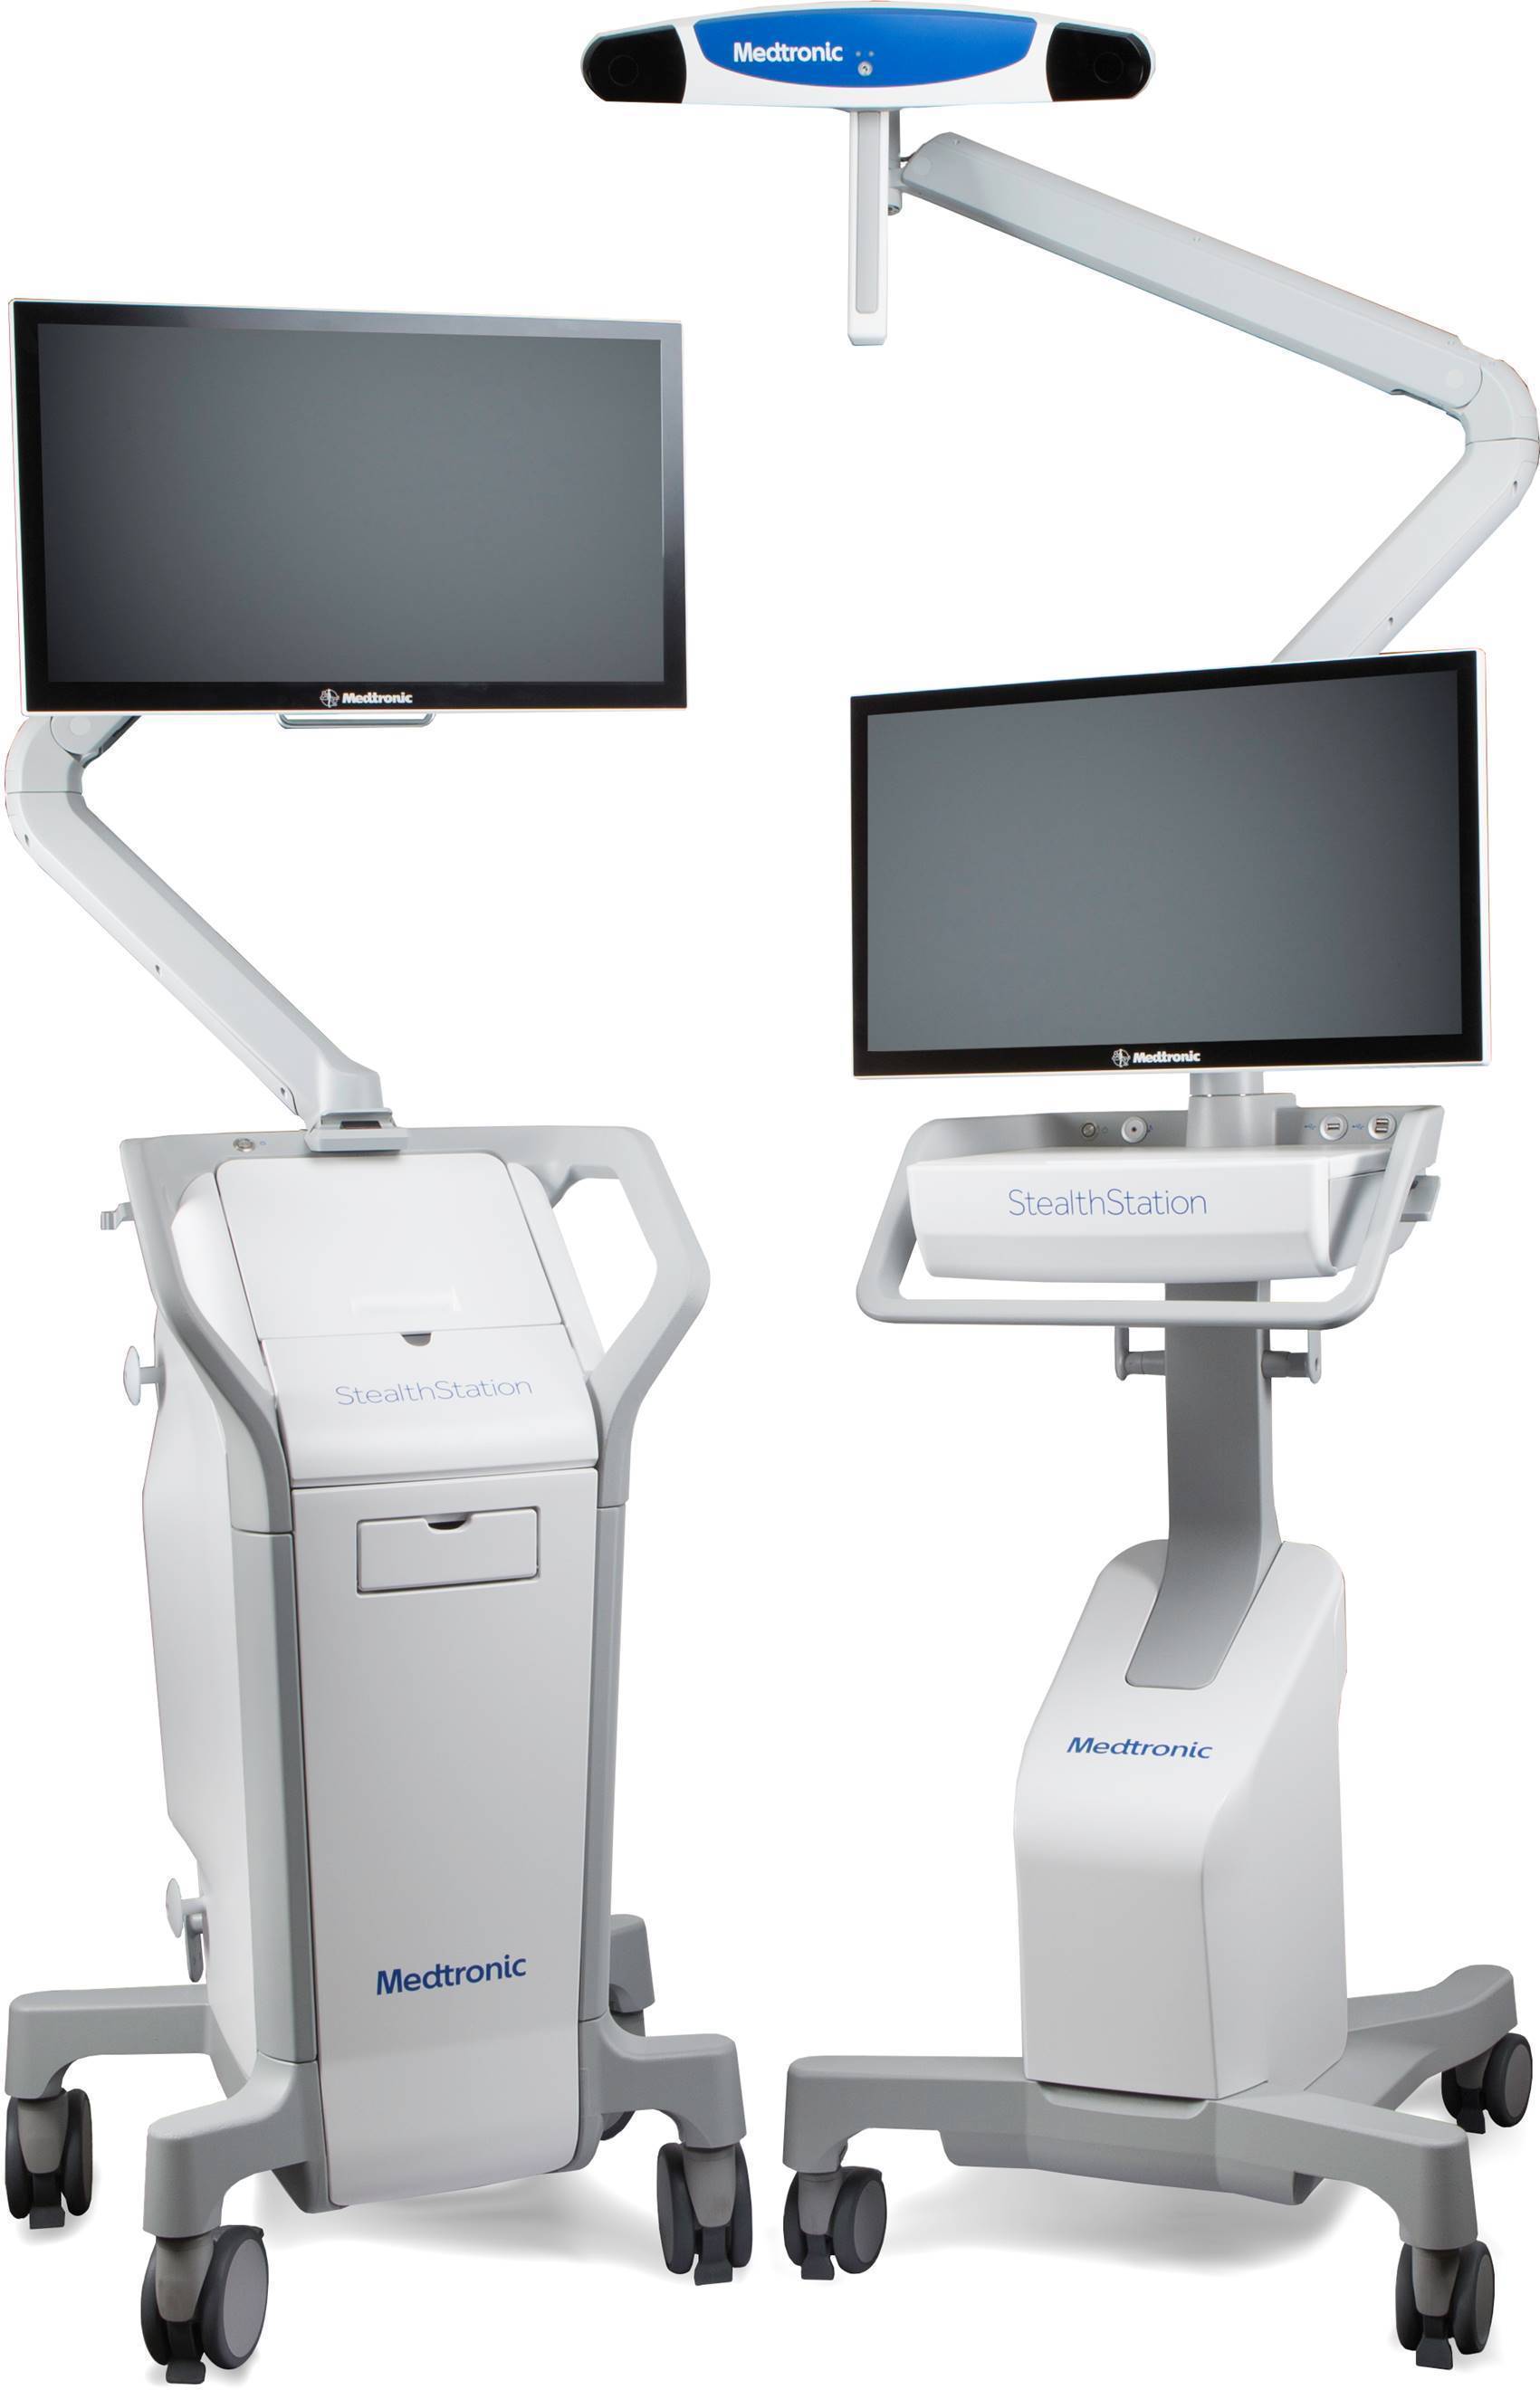 Medtronic Announces Most Advanced StealthStation for Neurosurgery